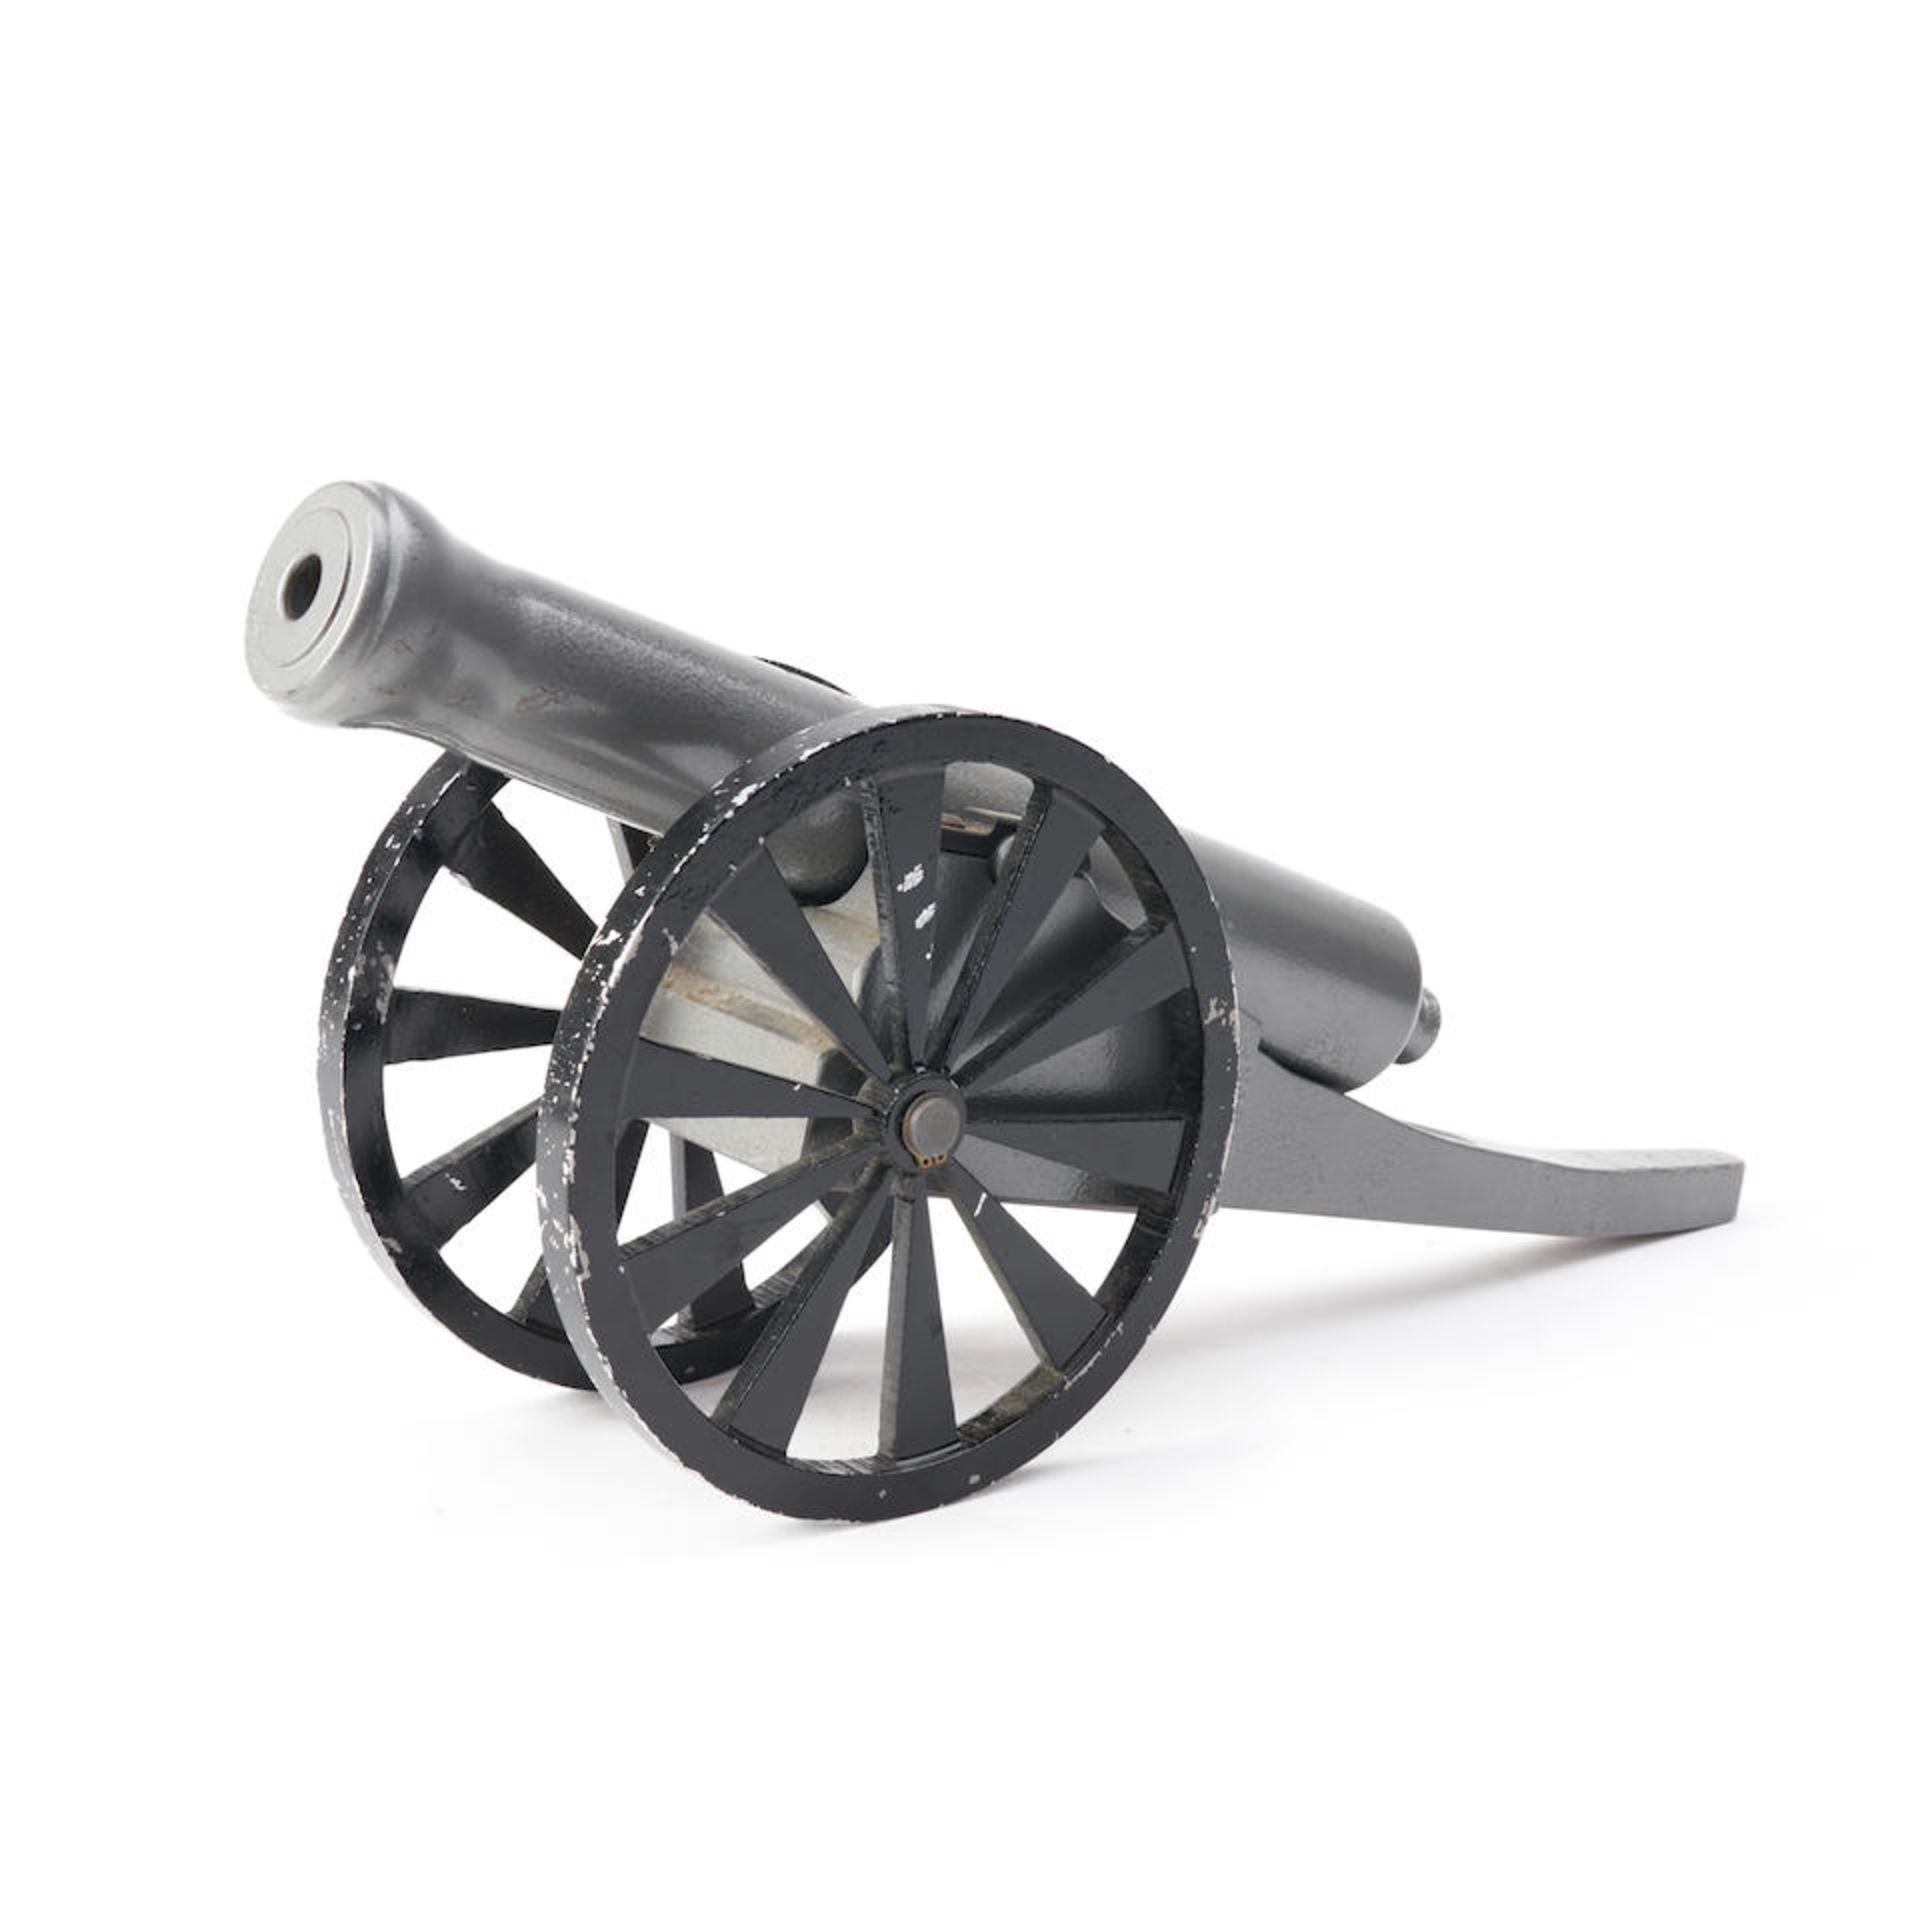 Miniature Field Cannon and Carriage,